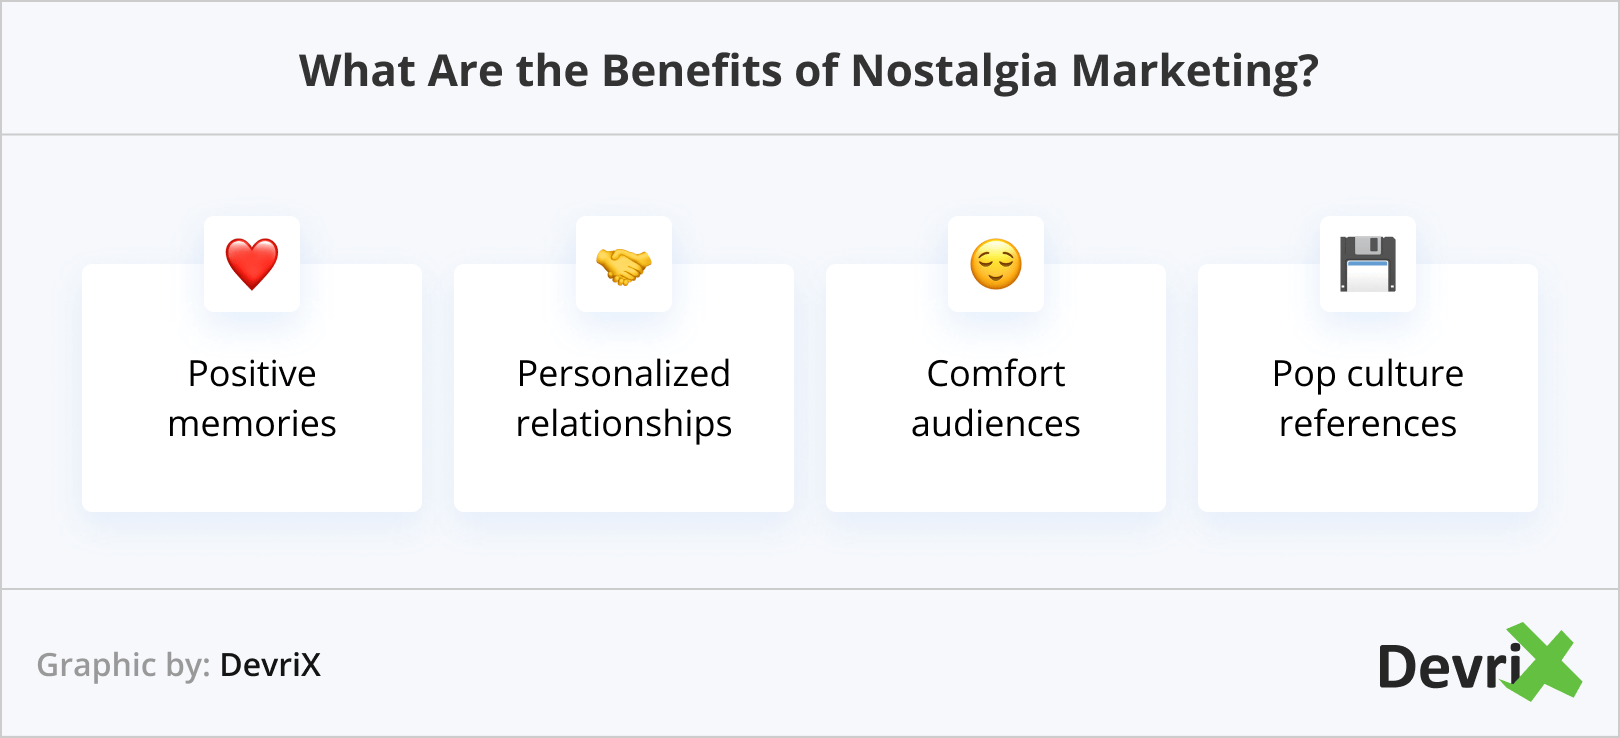 What Are the Benefits of Nostalgia Marketing